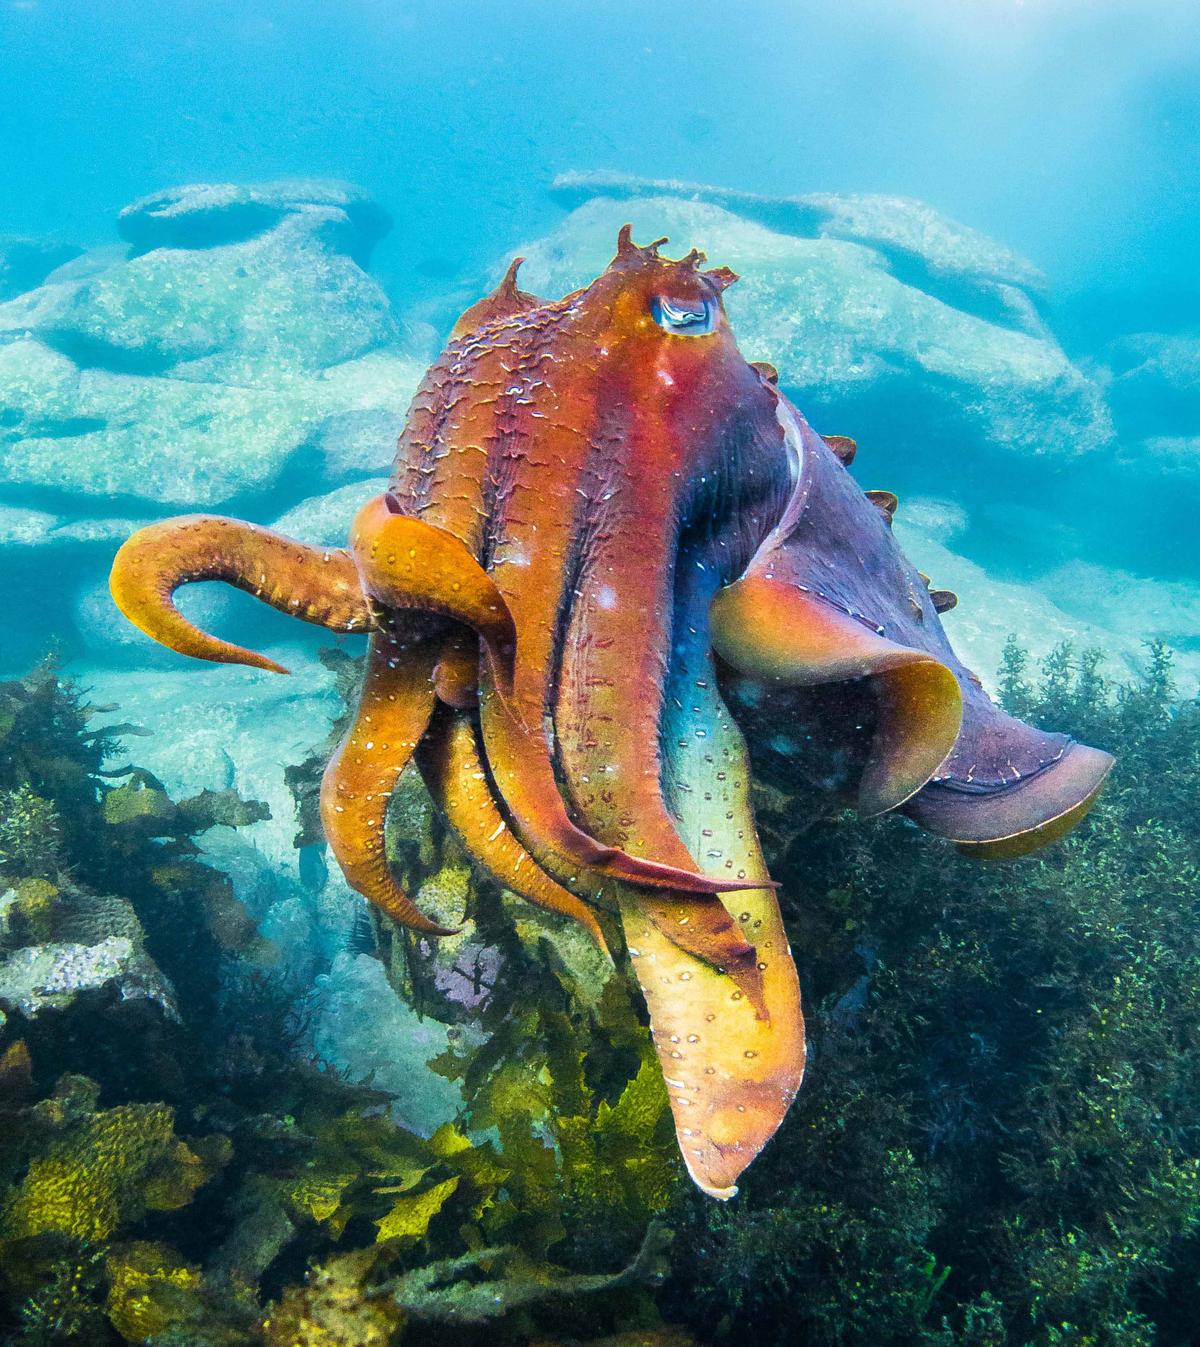 Male cuttlefish often adopt striking rainbow patterns during the mating season. (Caters News)